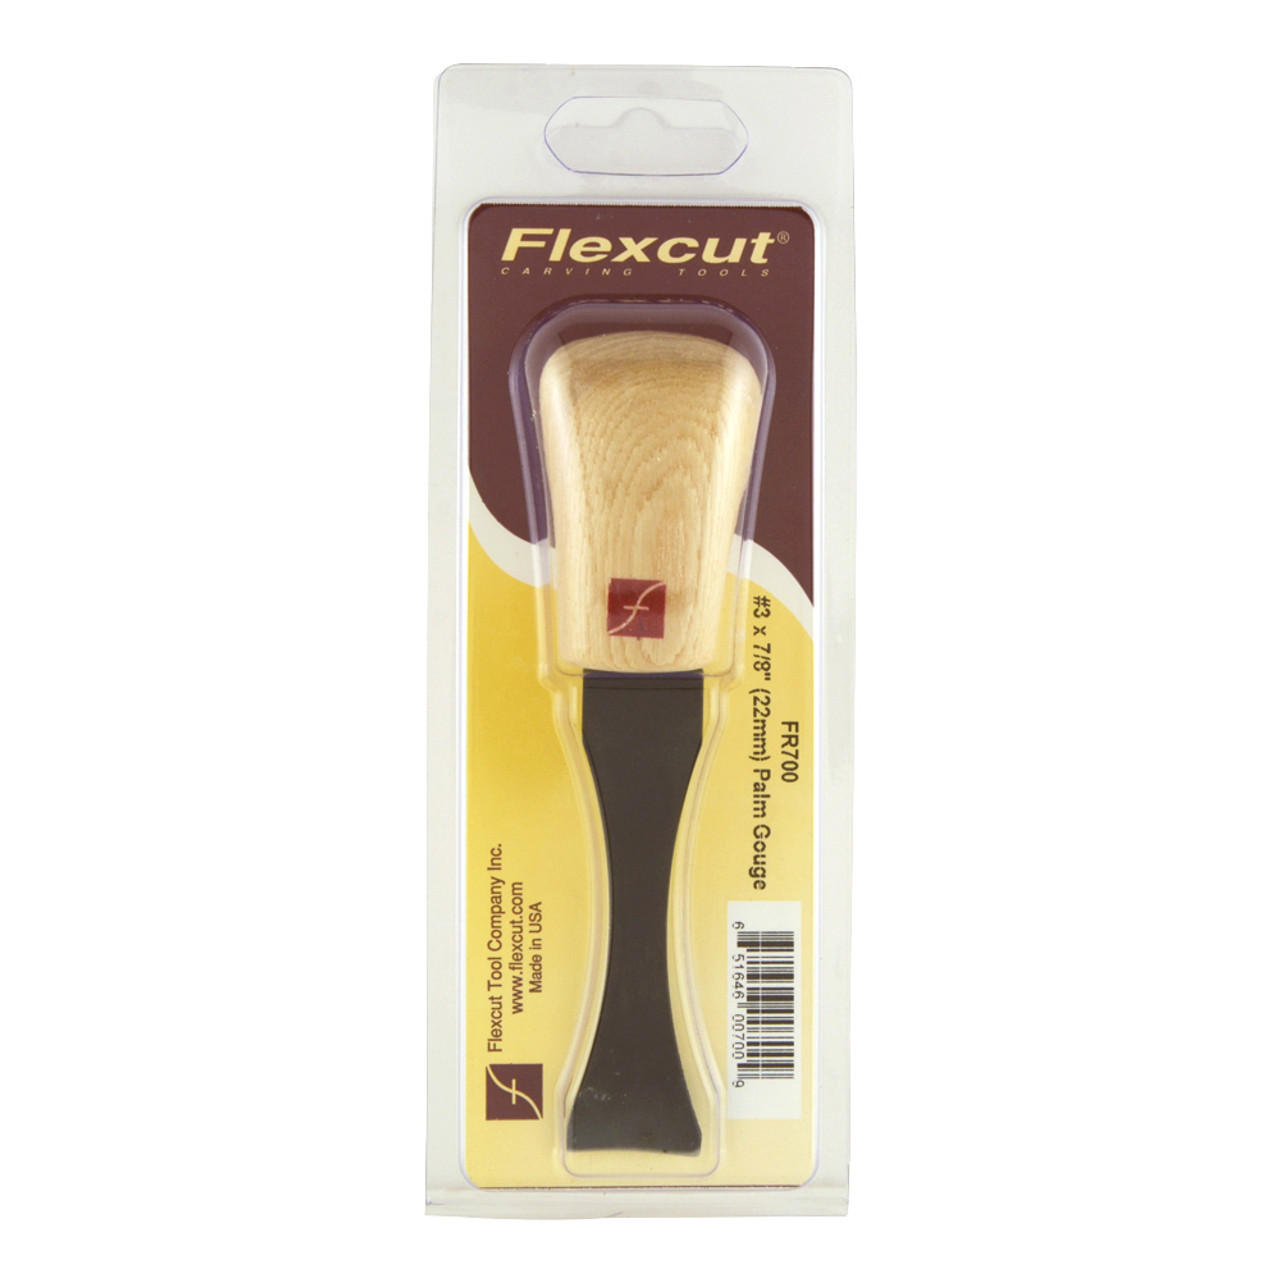 Enveloped in a clamshell package is this Flexcut #3 gouge that also includes a Flexcut card with the specifications of the carving tool.